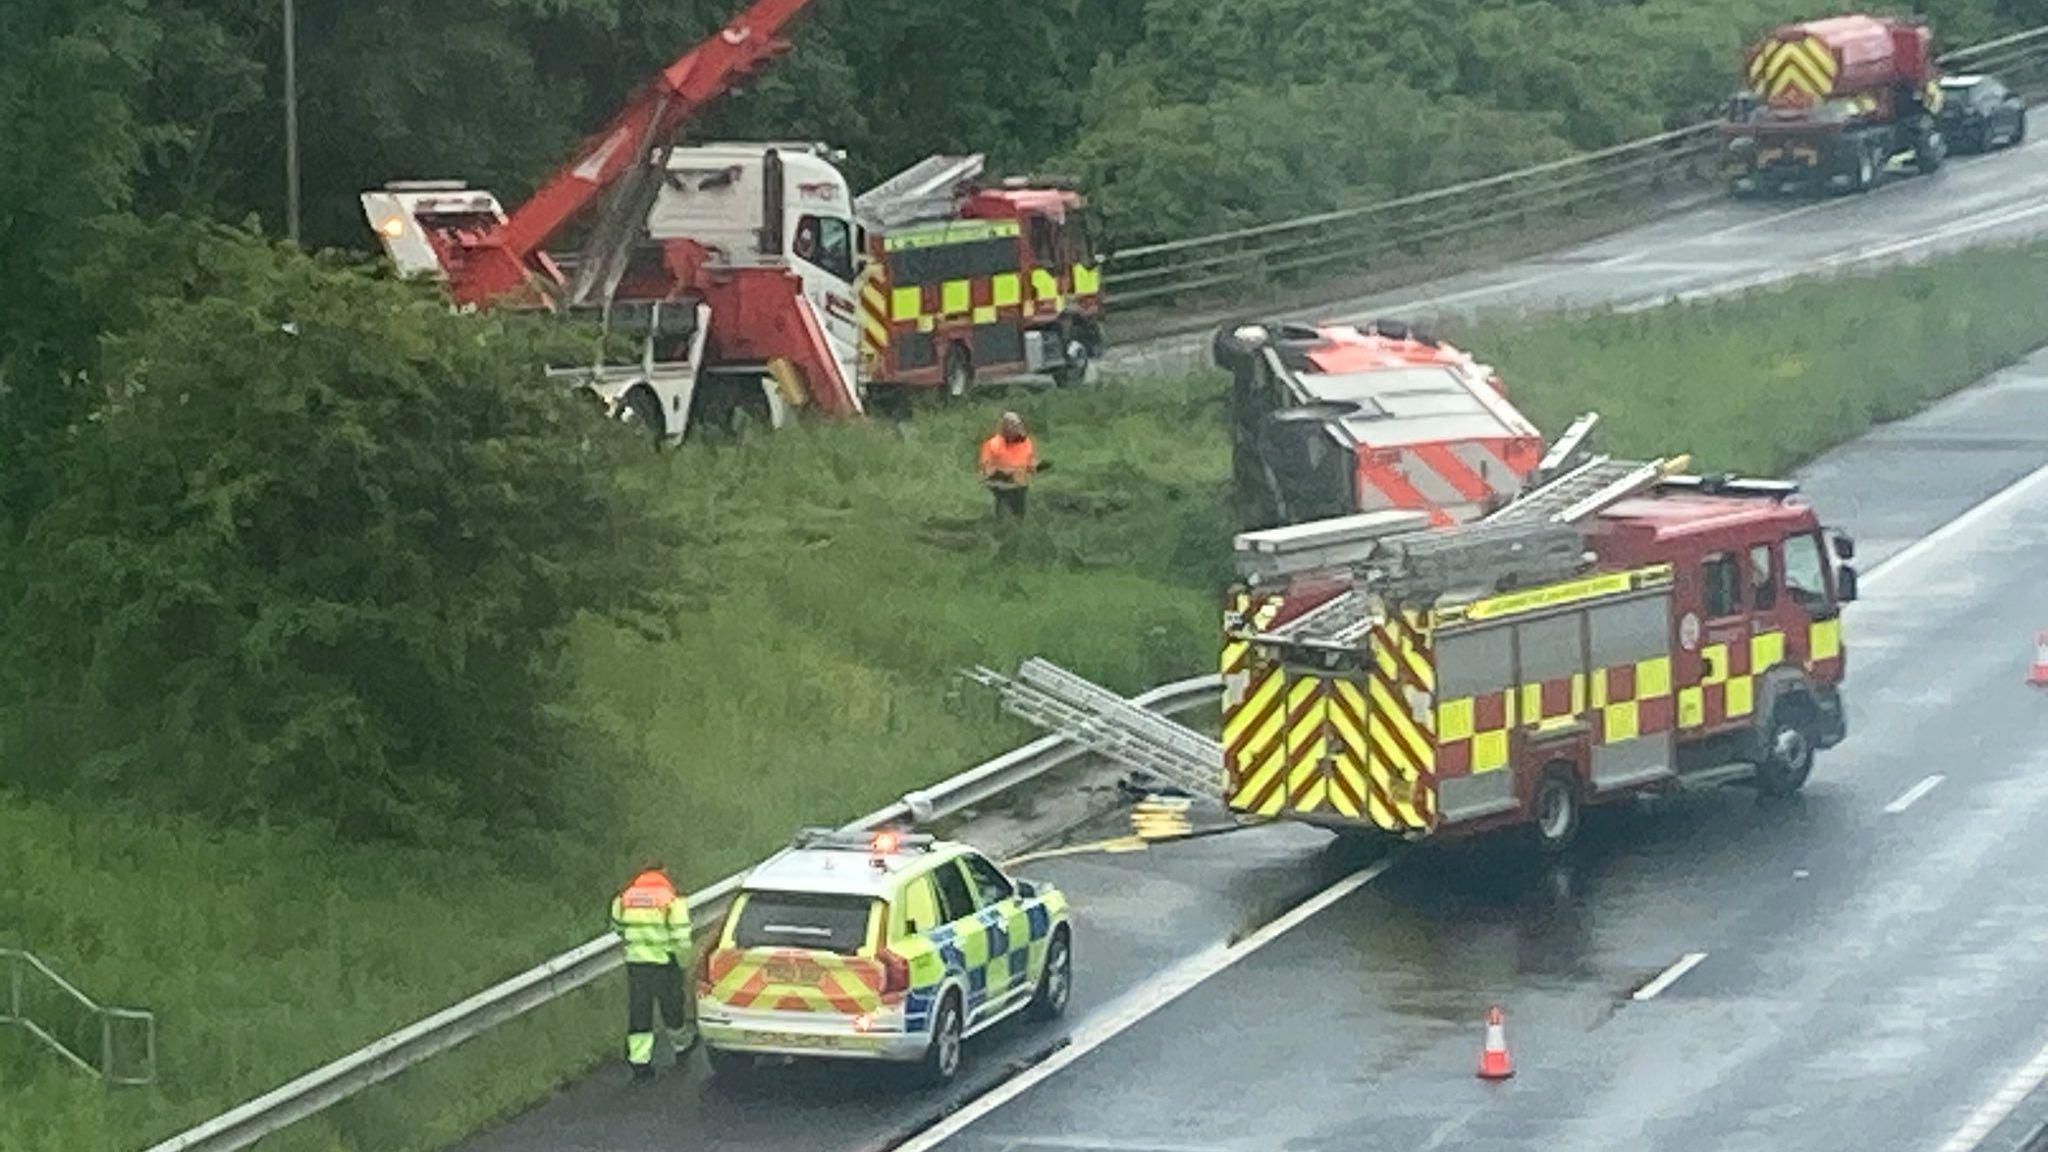 Fire engine being recovered after incident on M65